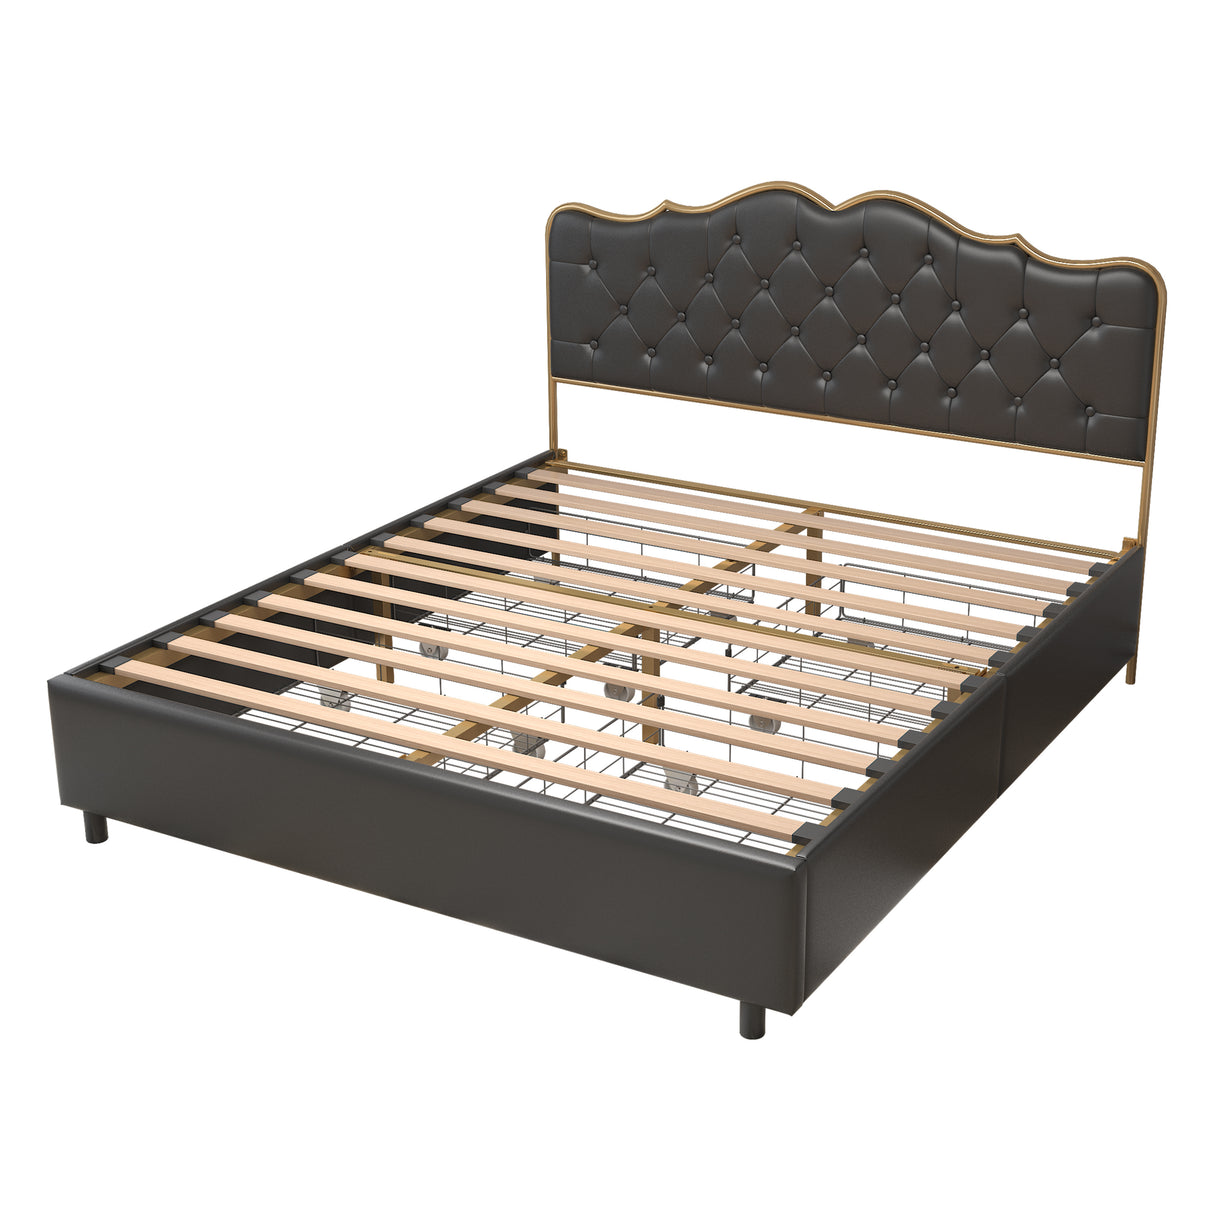 Black, Full-size bed. Classic buckle backrest, metal frame, solid wood ribs, with four storage drawers, sponge soft bag, comfortable and elegant atmosphere. - Home Elegance USA